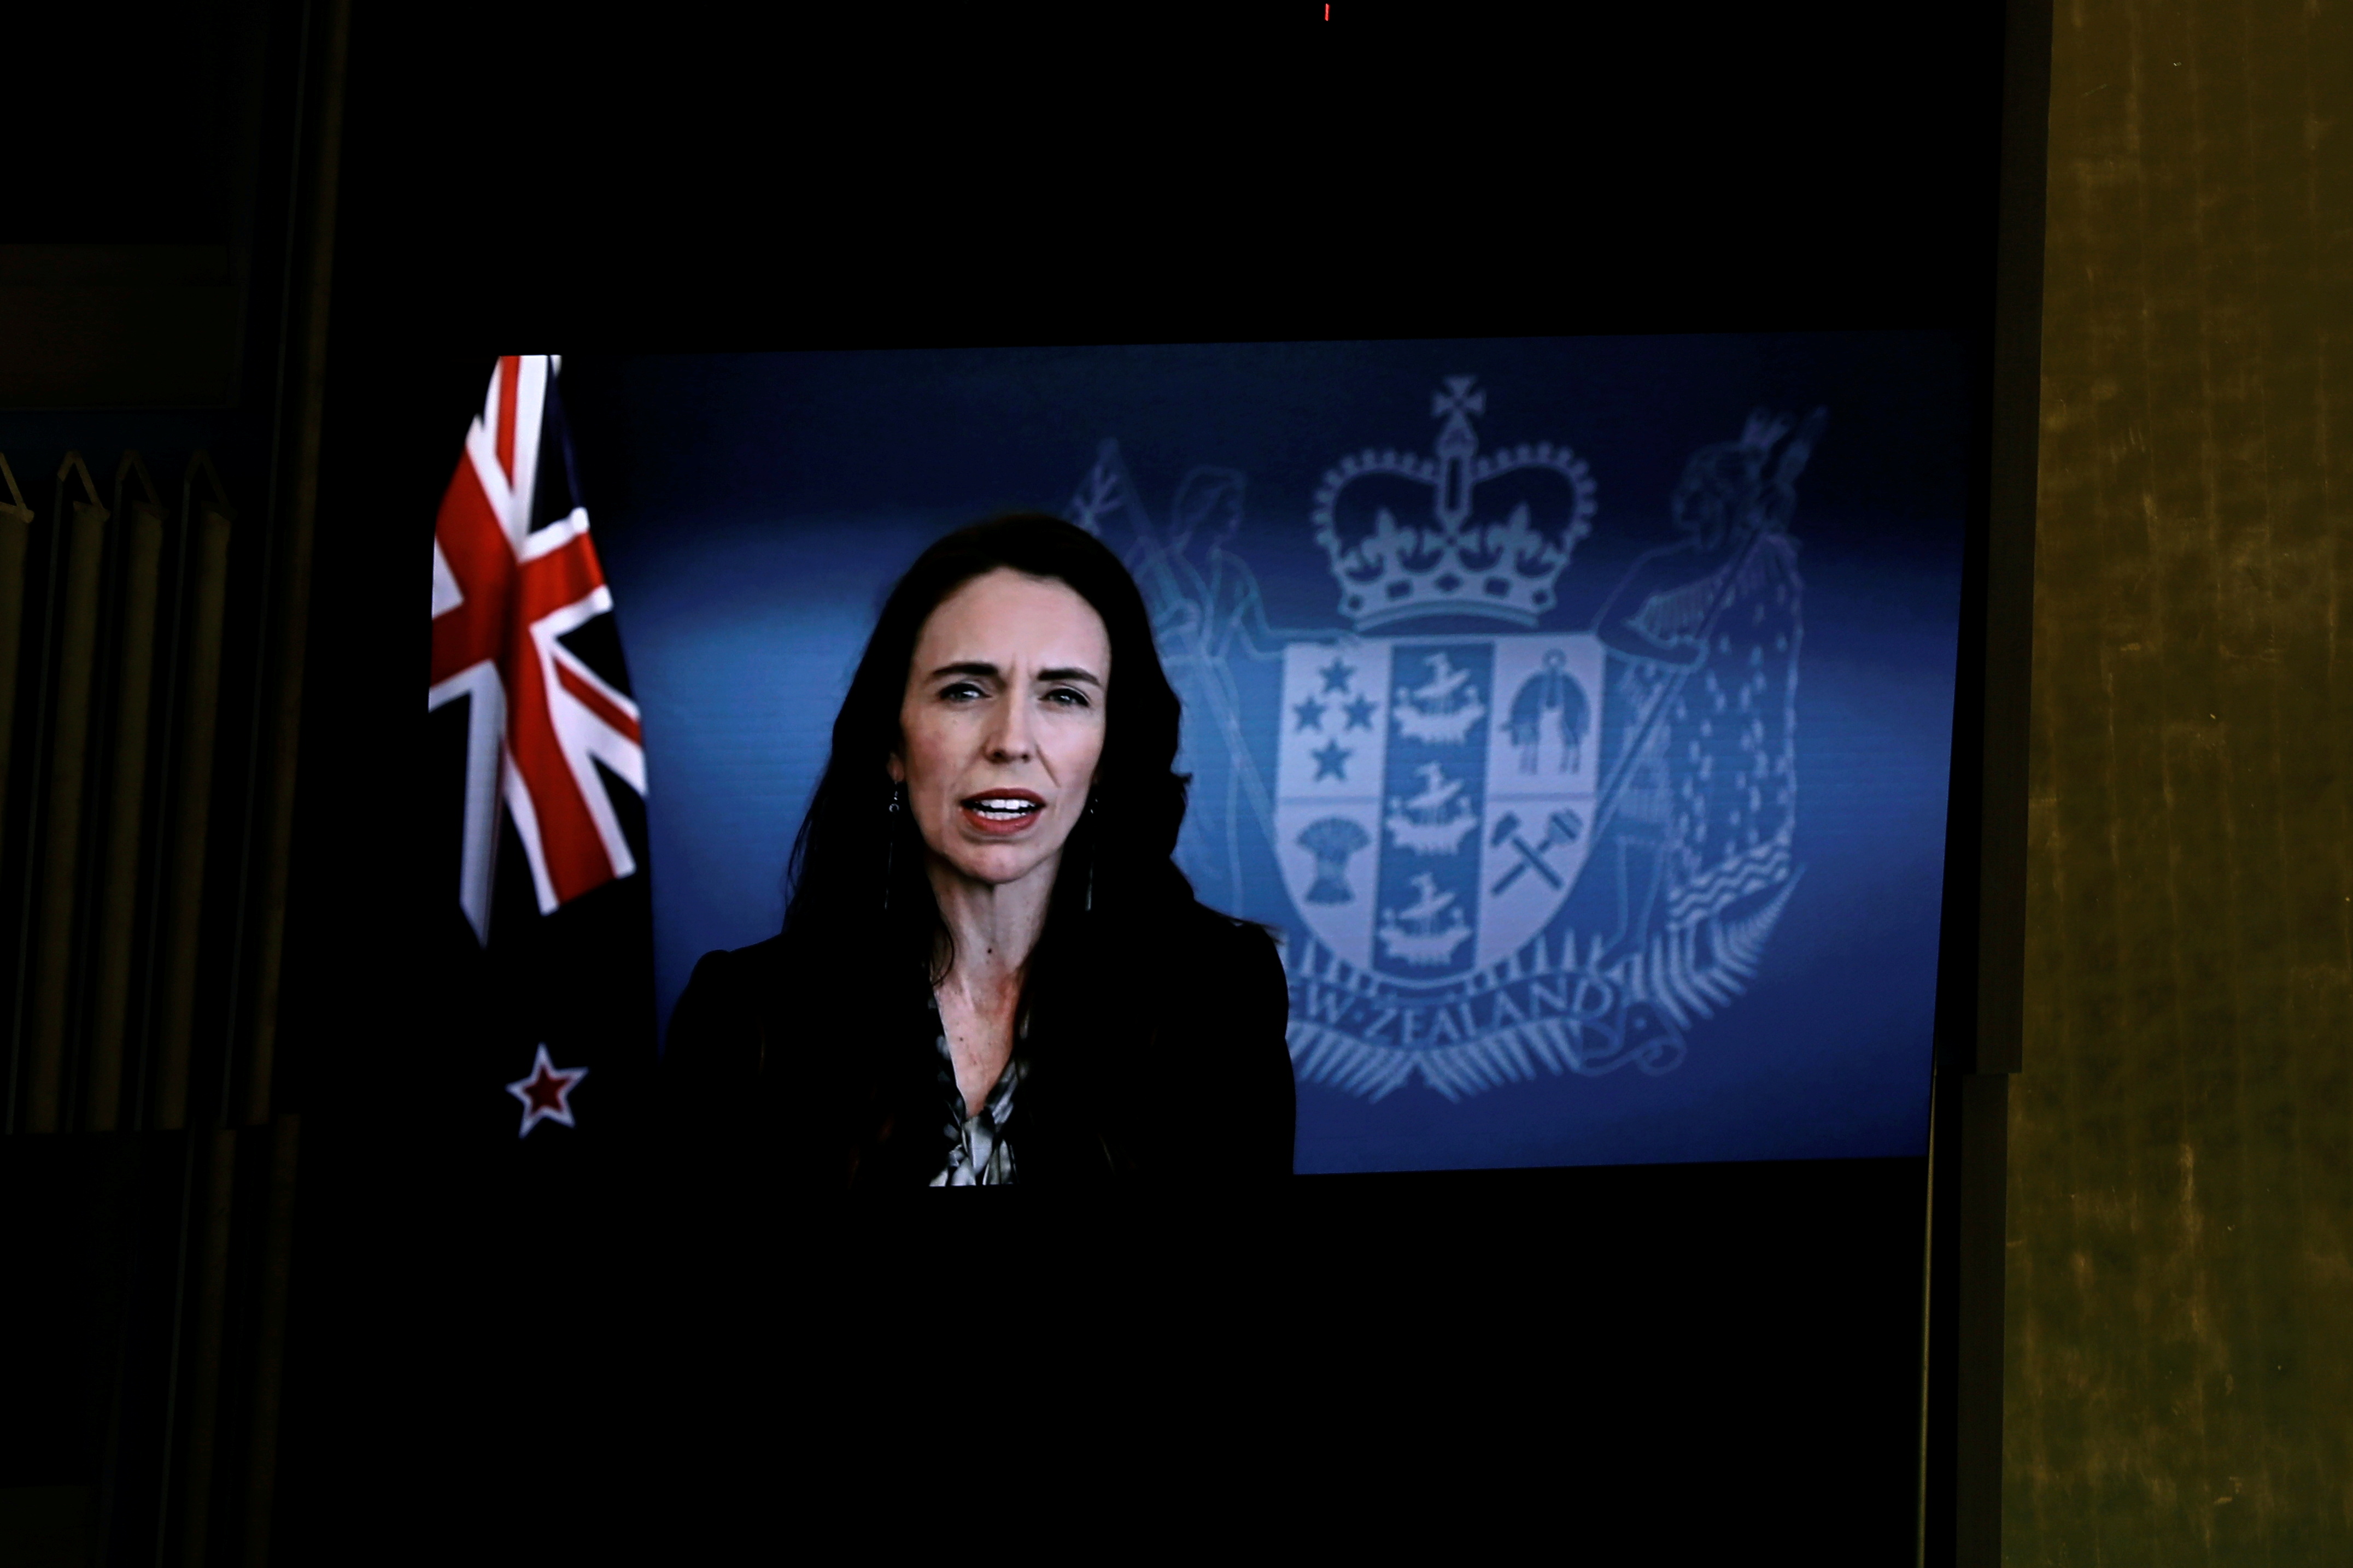 New Zealand's Prime Minister Jacinda Ardern addresses via pre-recorded video the UN General Assembly 76th session General Debate in UN General Assembly Hall at the United Nations Headquarters in New York City, New York, U.S., September 24, 2021. Peter Foley/Pool via REUTERS